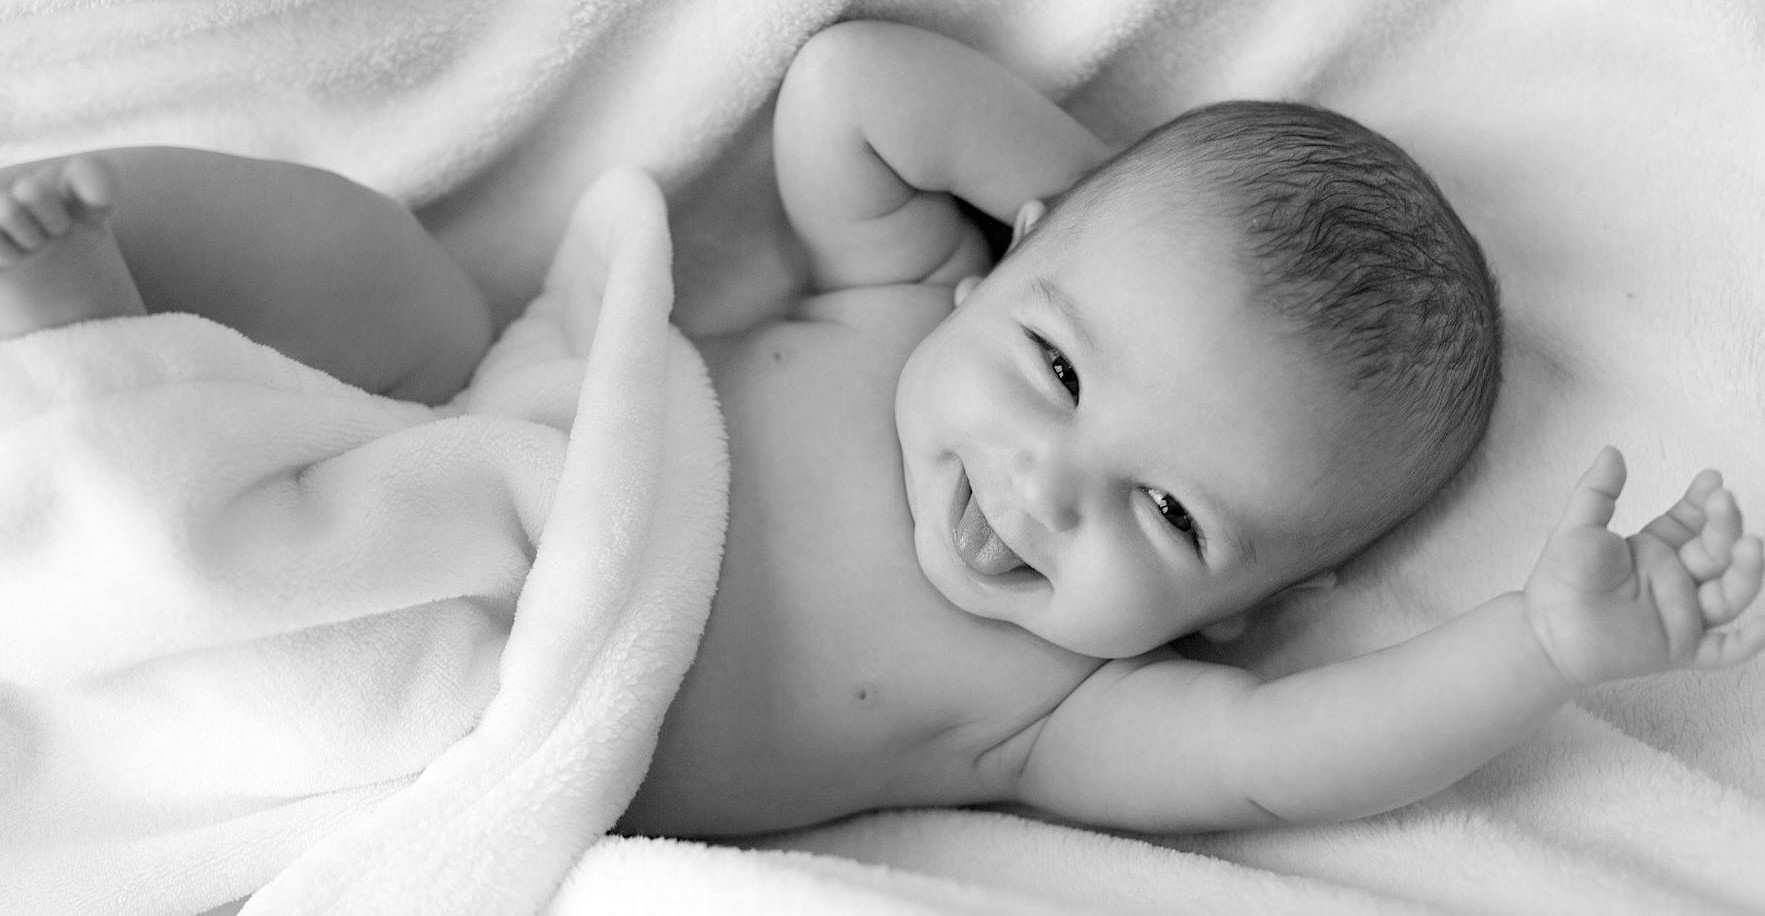 A black and white photo of a smiling baby in a blanket